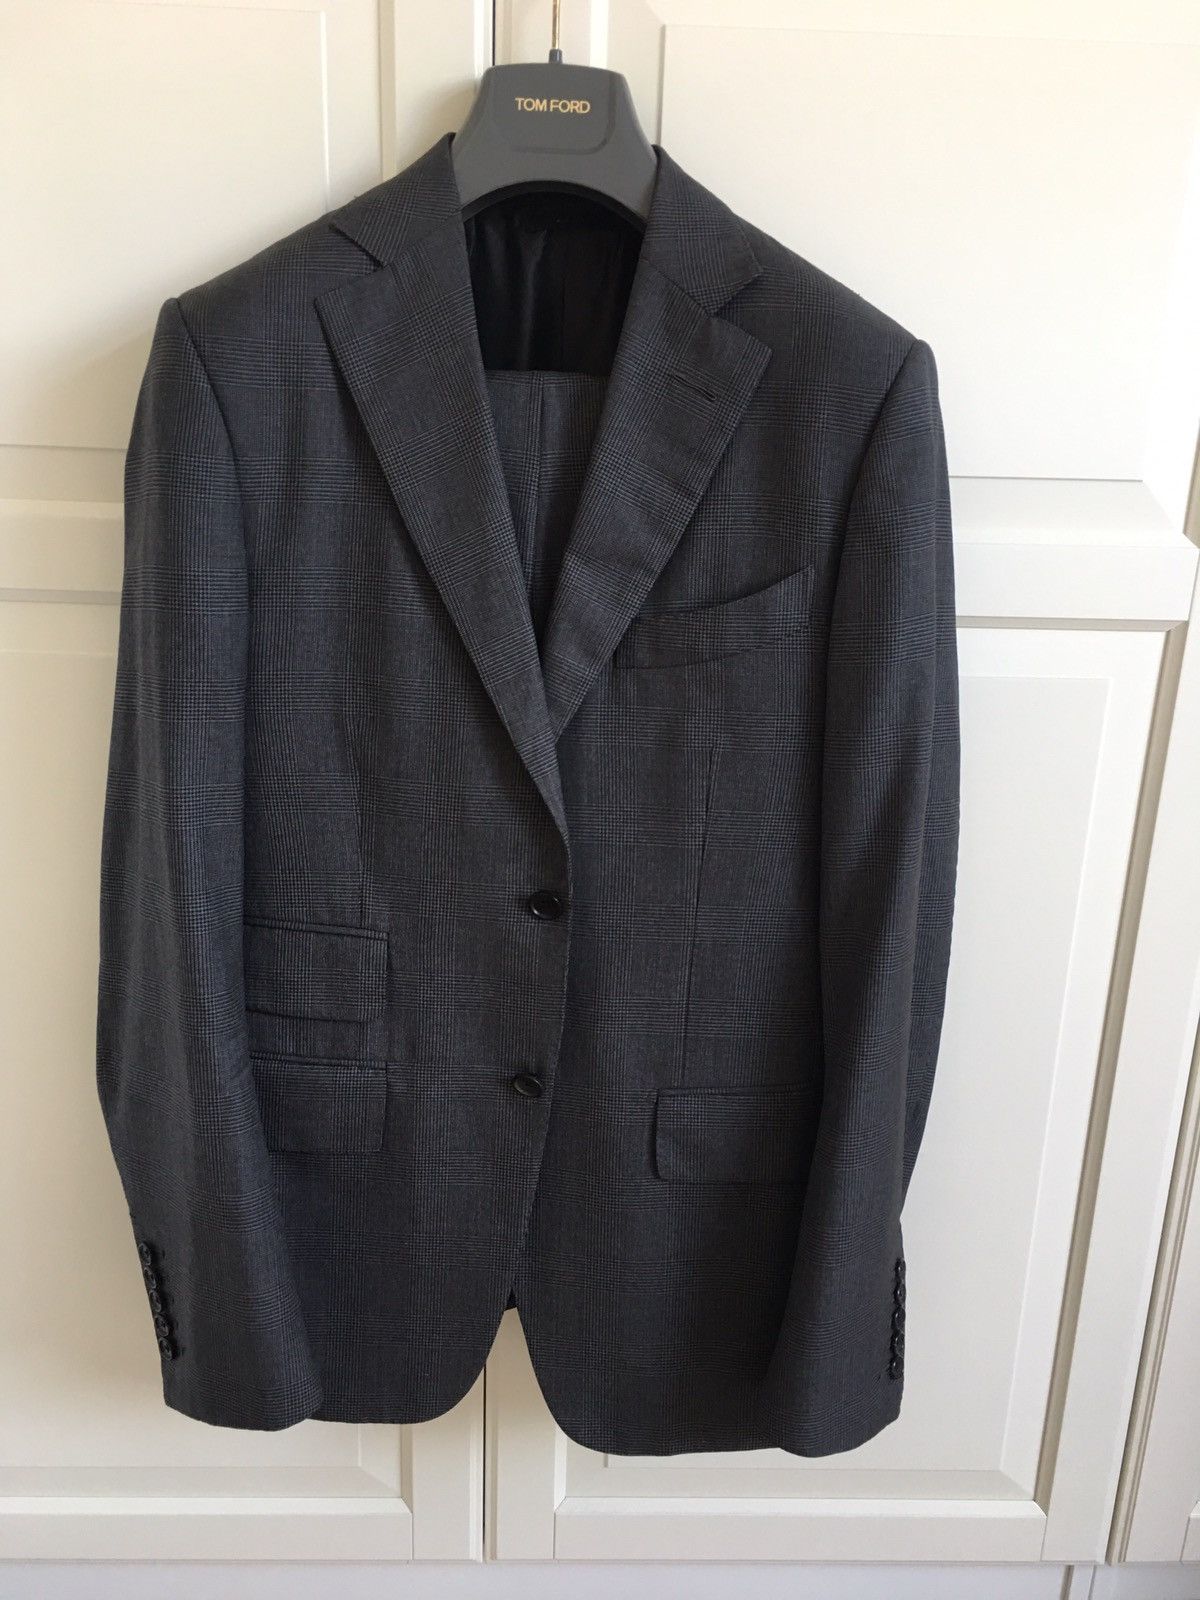 Tom Ford Tom Ford Suit Size 38R - 1 Preview